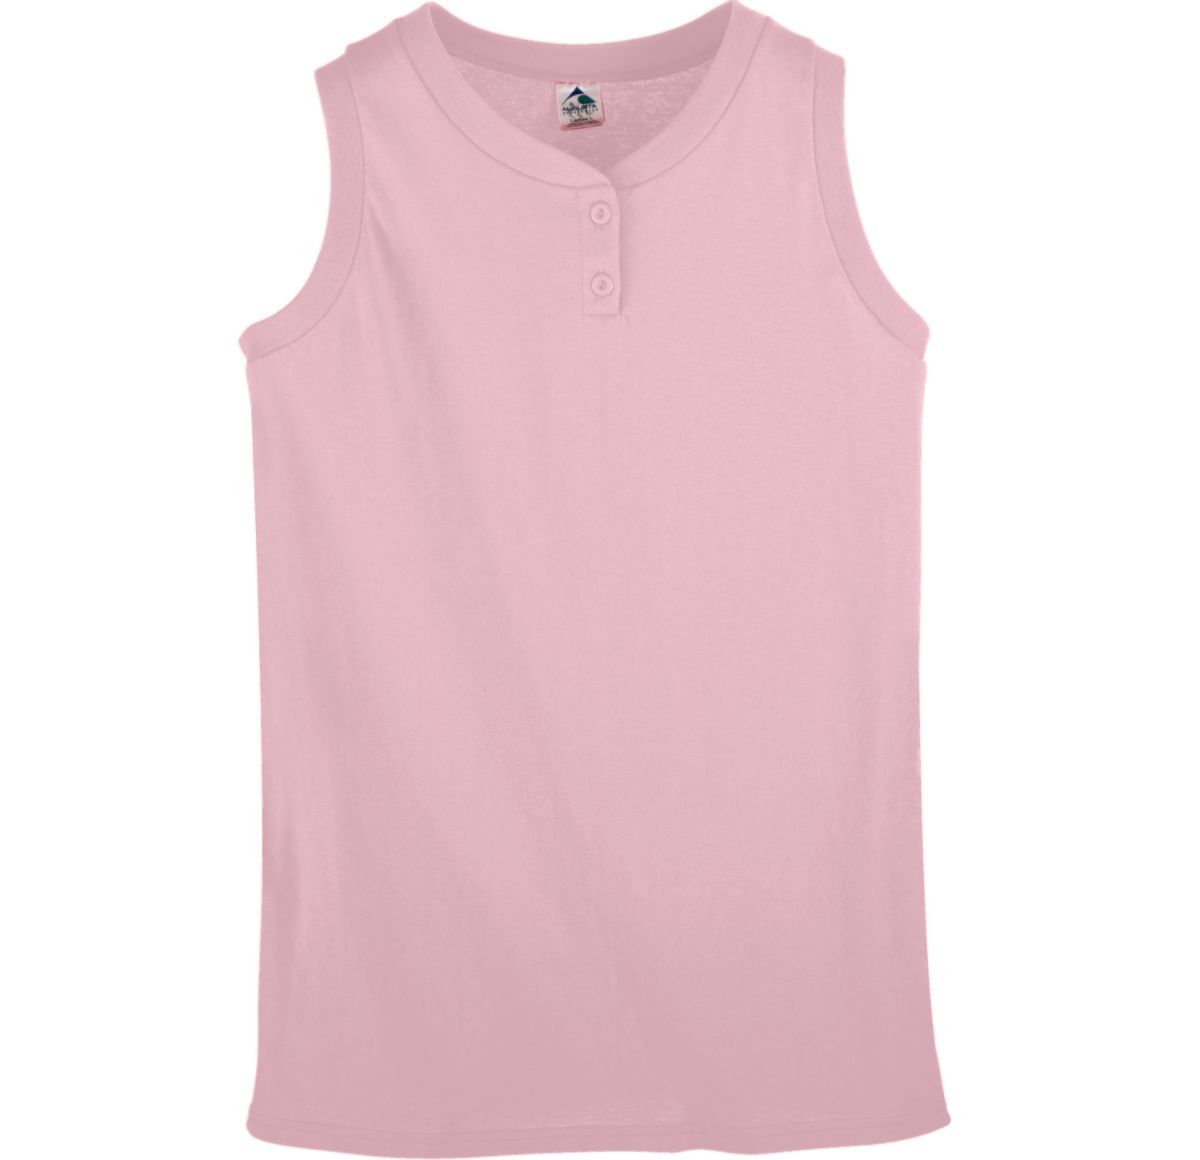 Augusta Sportswear Ladies Sleeveless Two Button Softball Jersey in Light Pink  -Part of the Ladies, Ladies-Jersey, Augusta-Products, Softball, Shirts product lines at KanaleyCreations.com